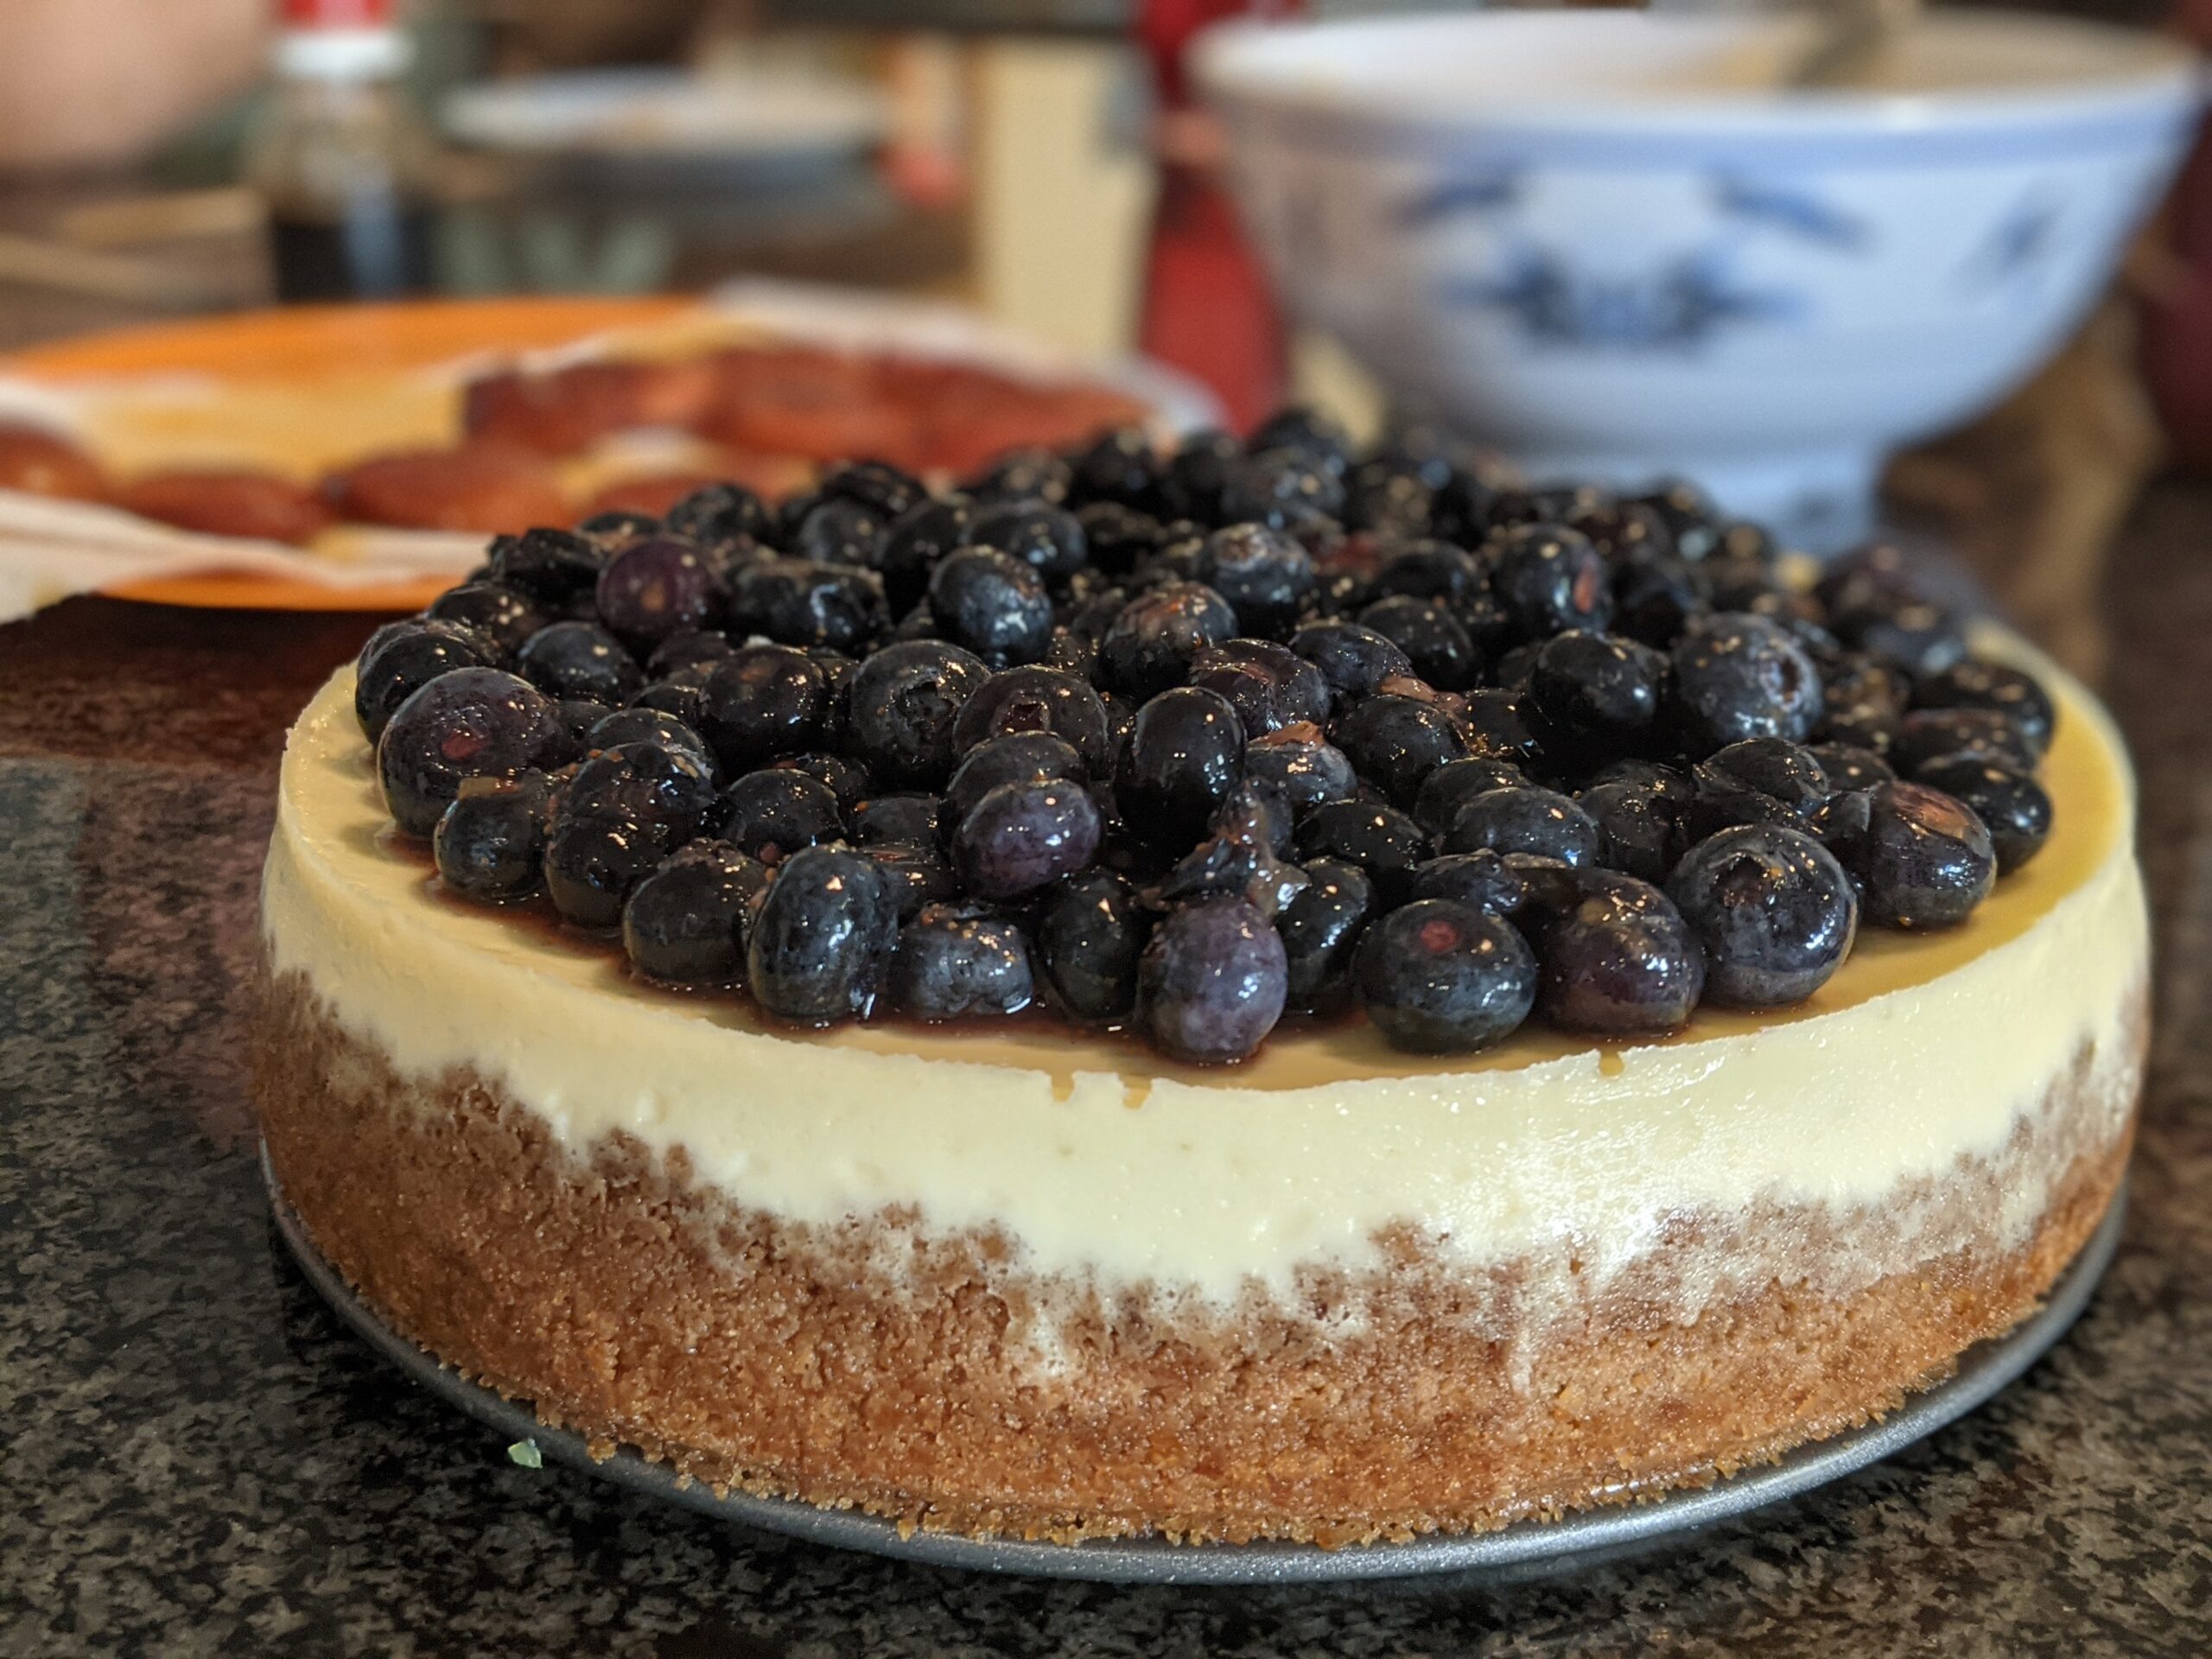 Cheesecake with blueberries on top.